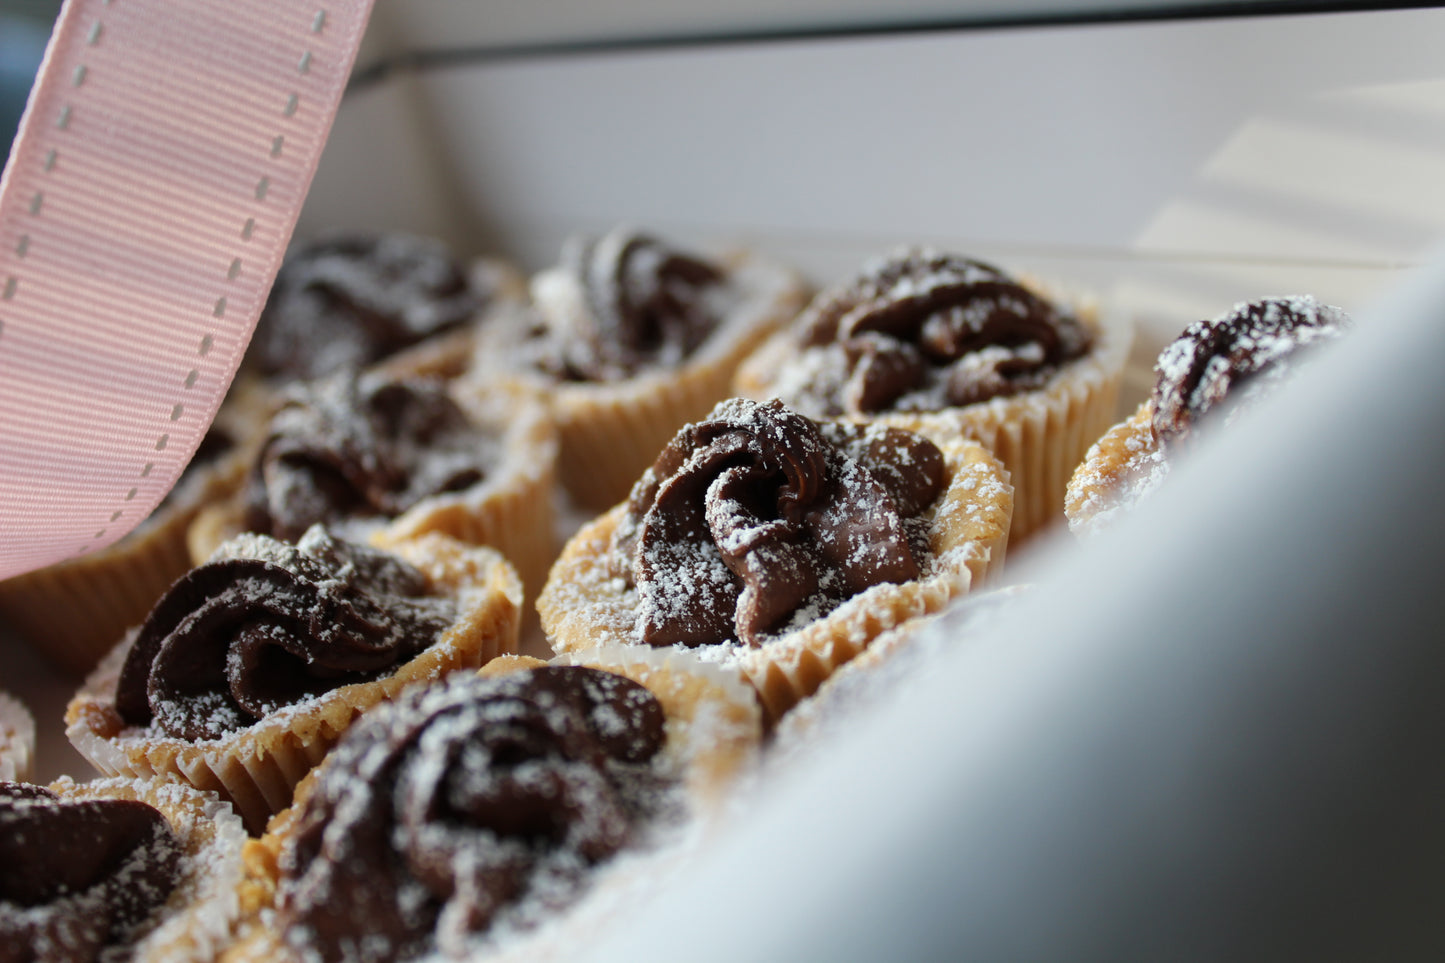 Chocolate Gluten Free Pastry Minis - 18 Piece Gift Box - softly textured buttery gluten free dough enrobed around a dollop of chocolate ganache filling